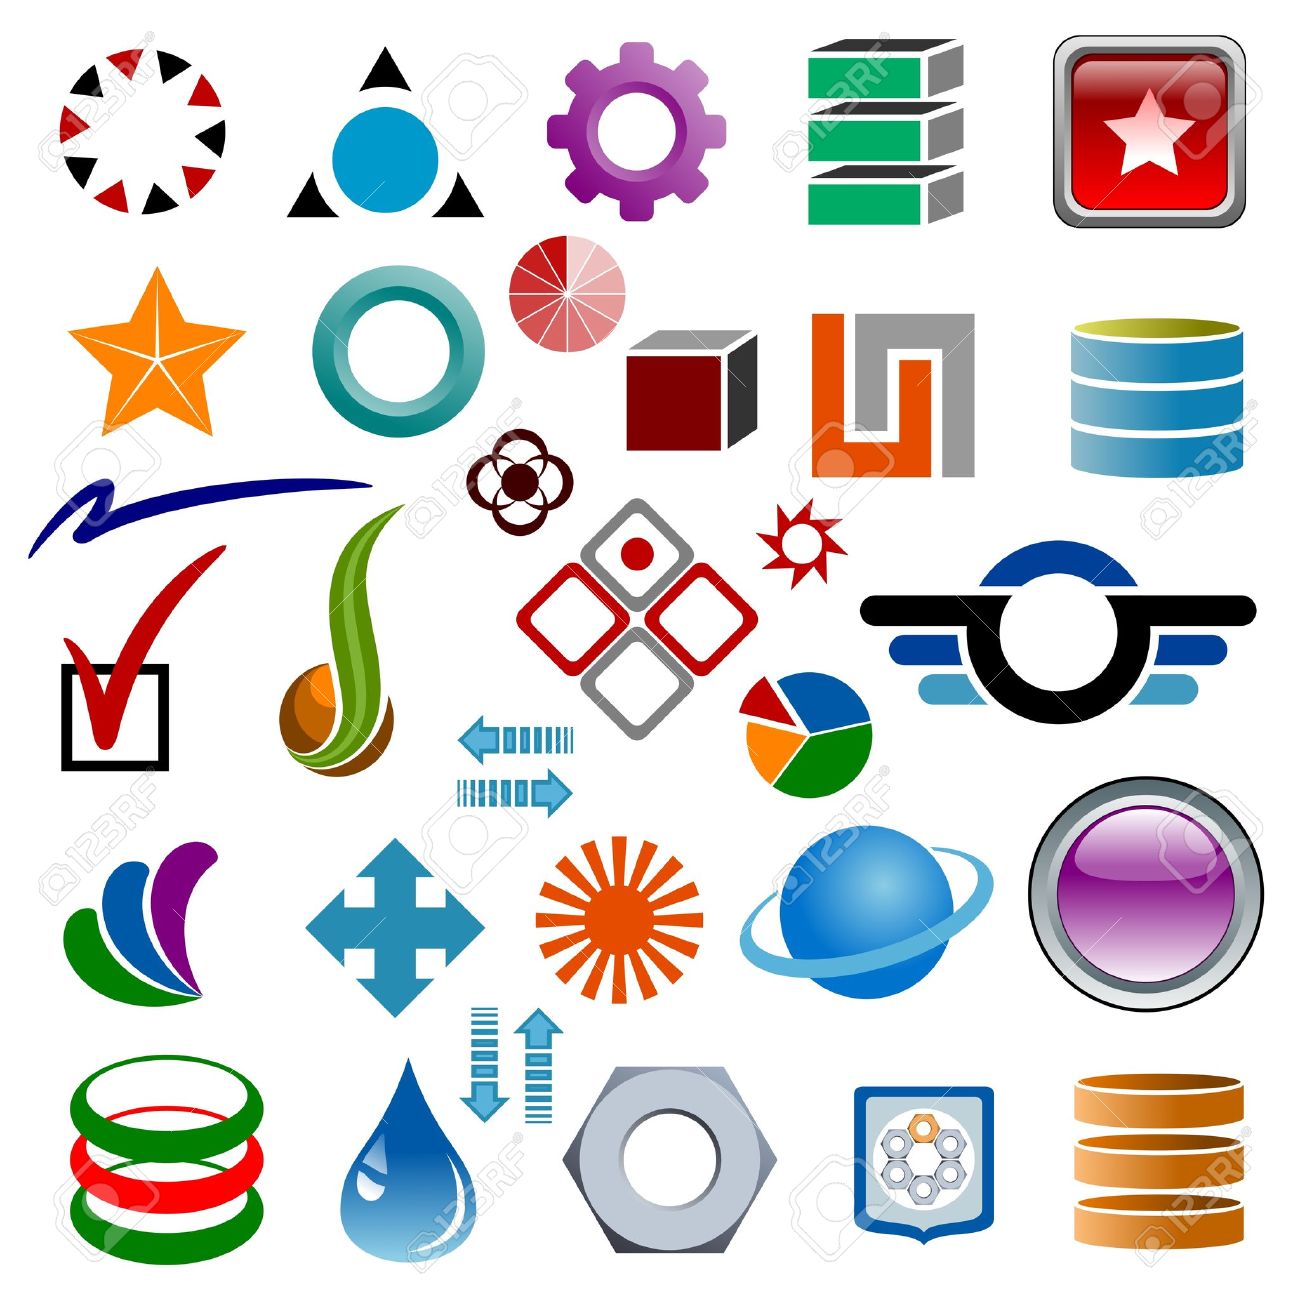 Free Logo Clipart Images Clipart Best Clipart Best | Images and Photos ...